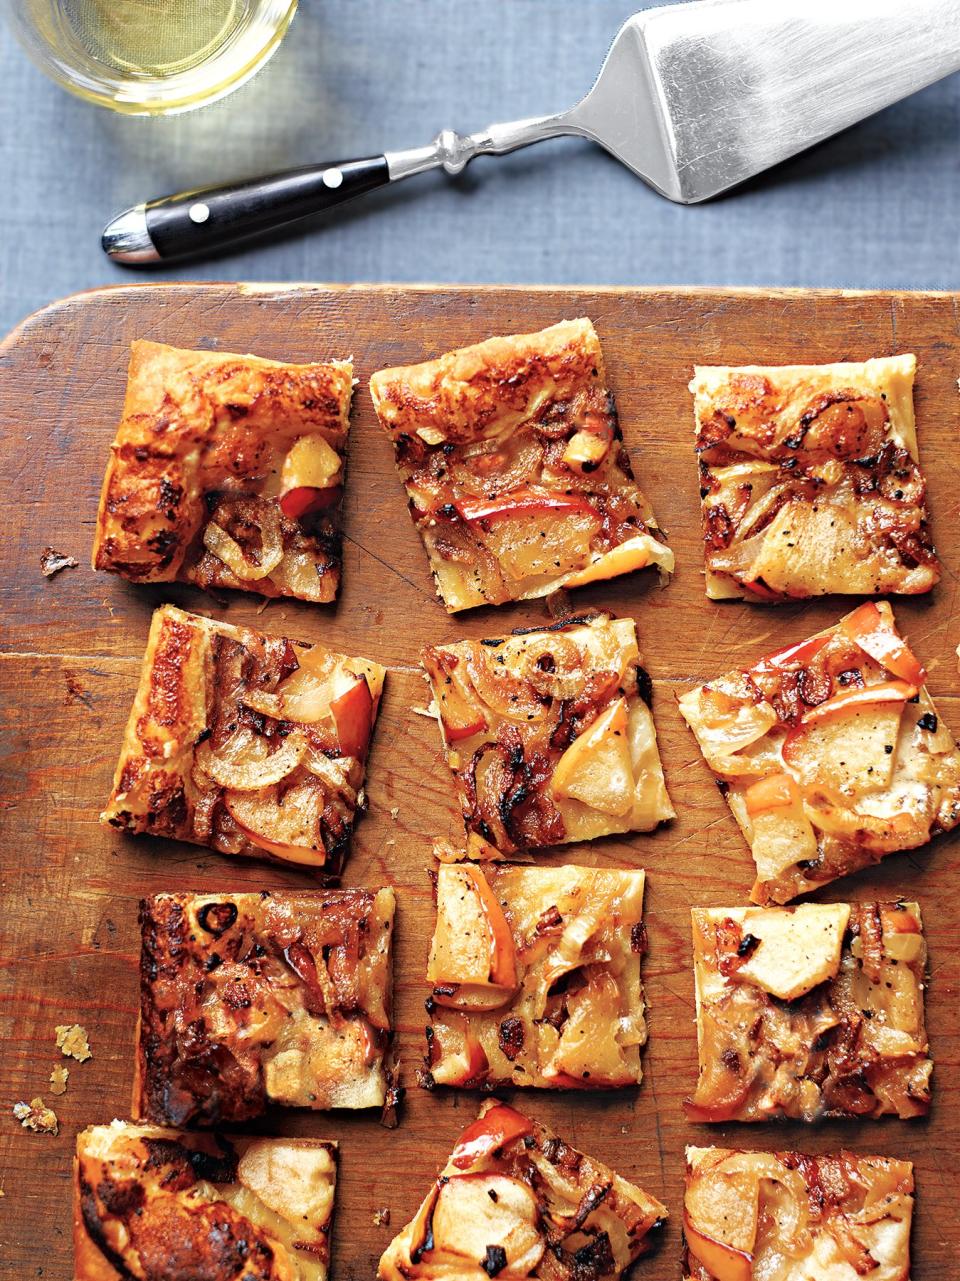  Caramelized Onion Tarts With Apples